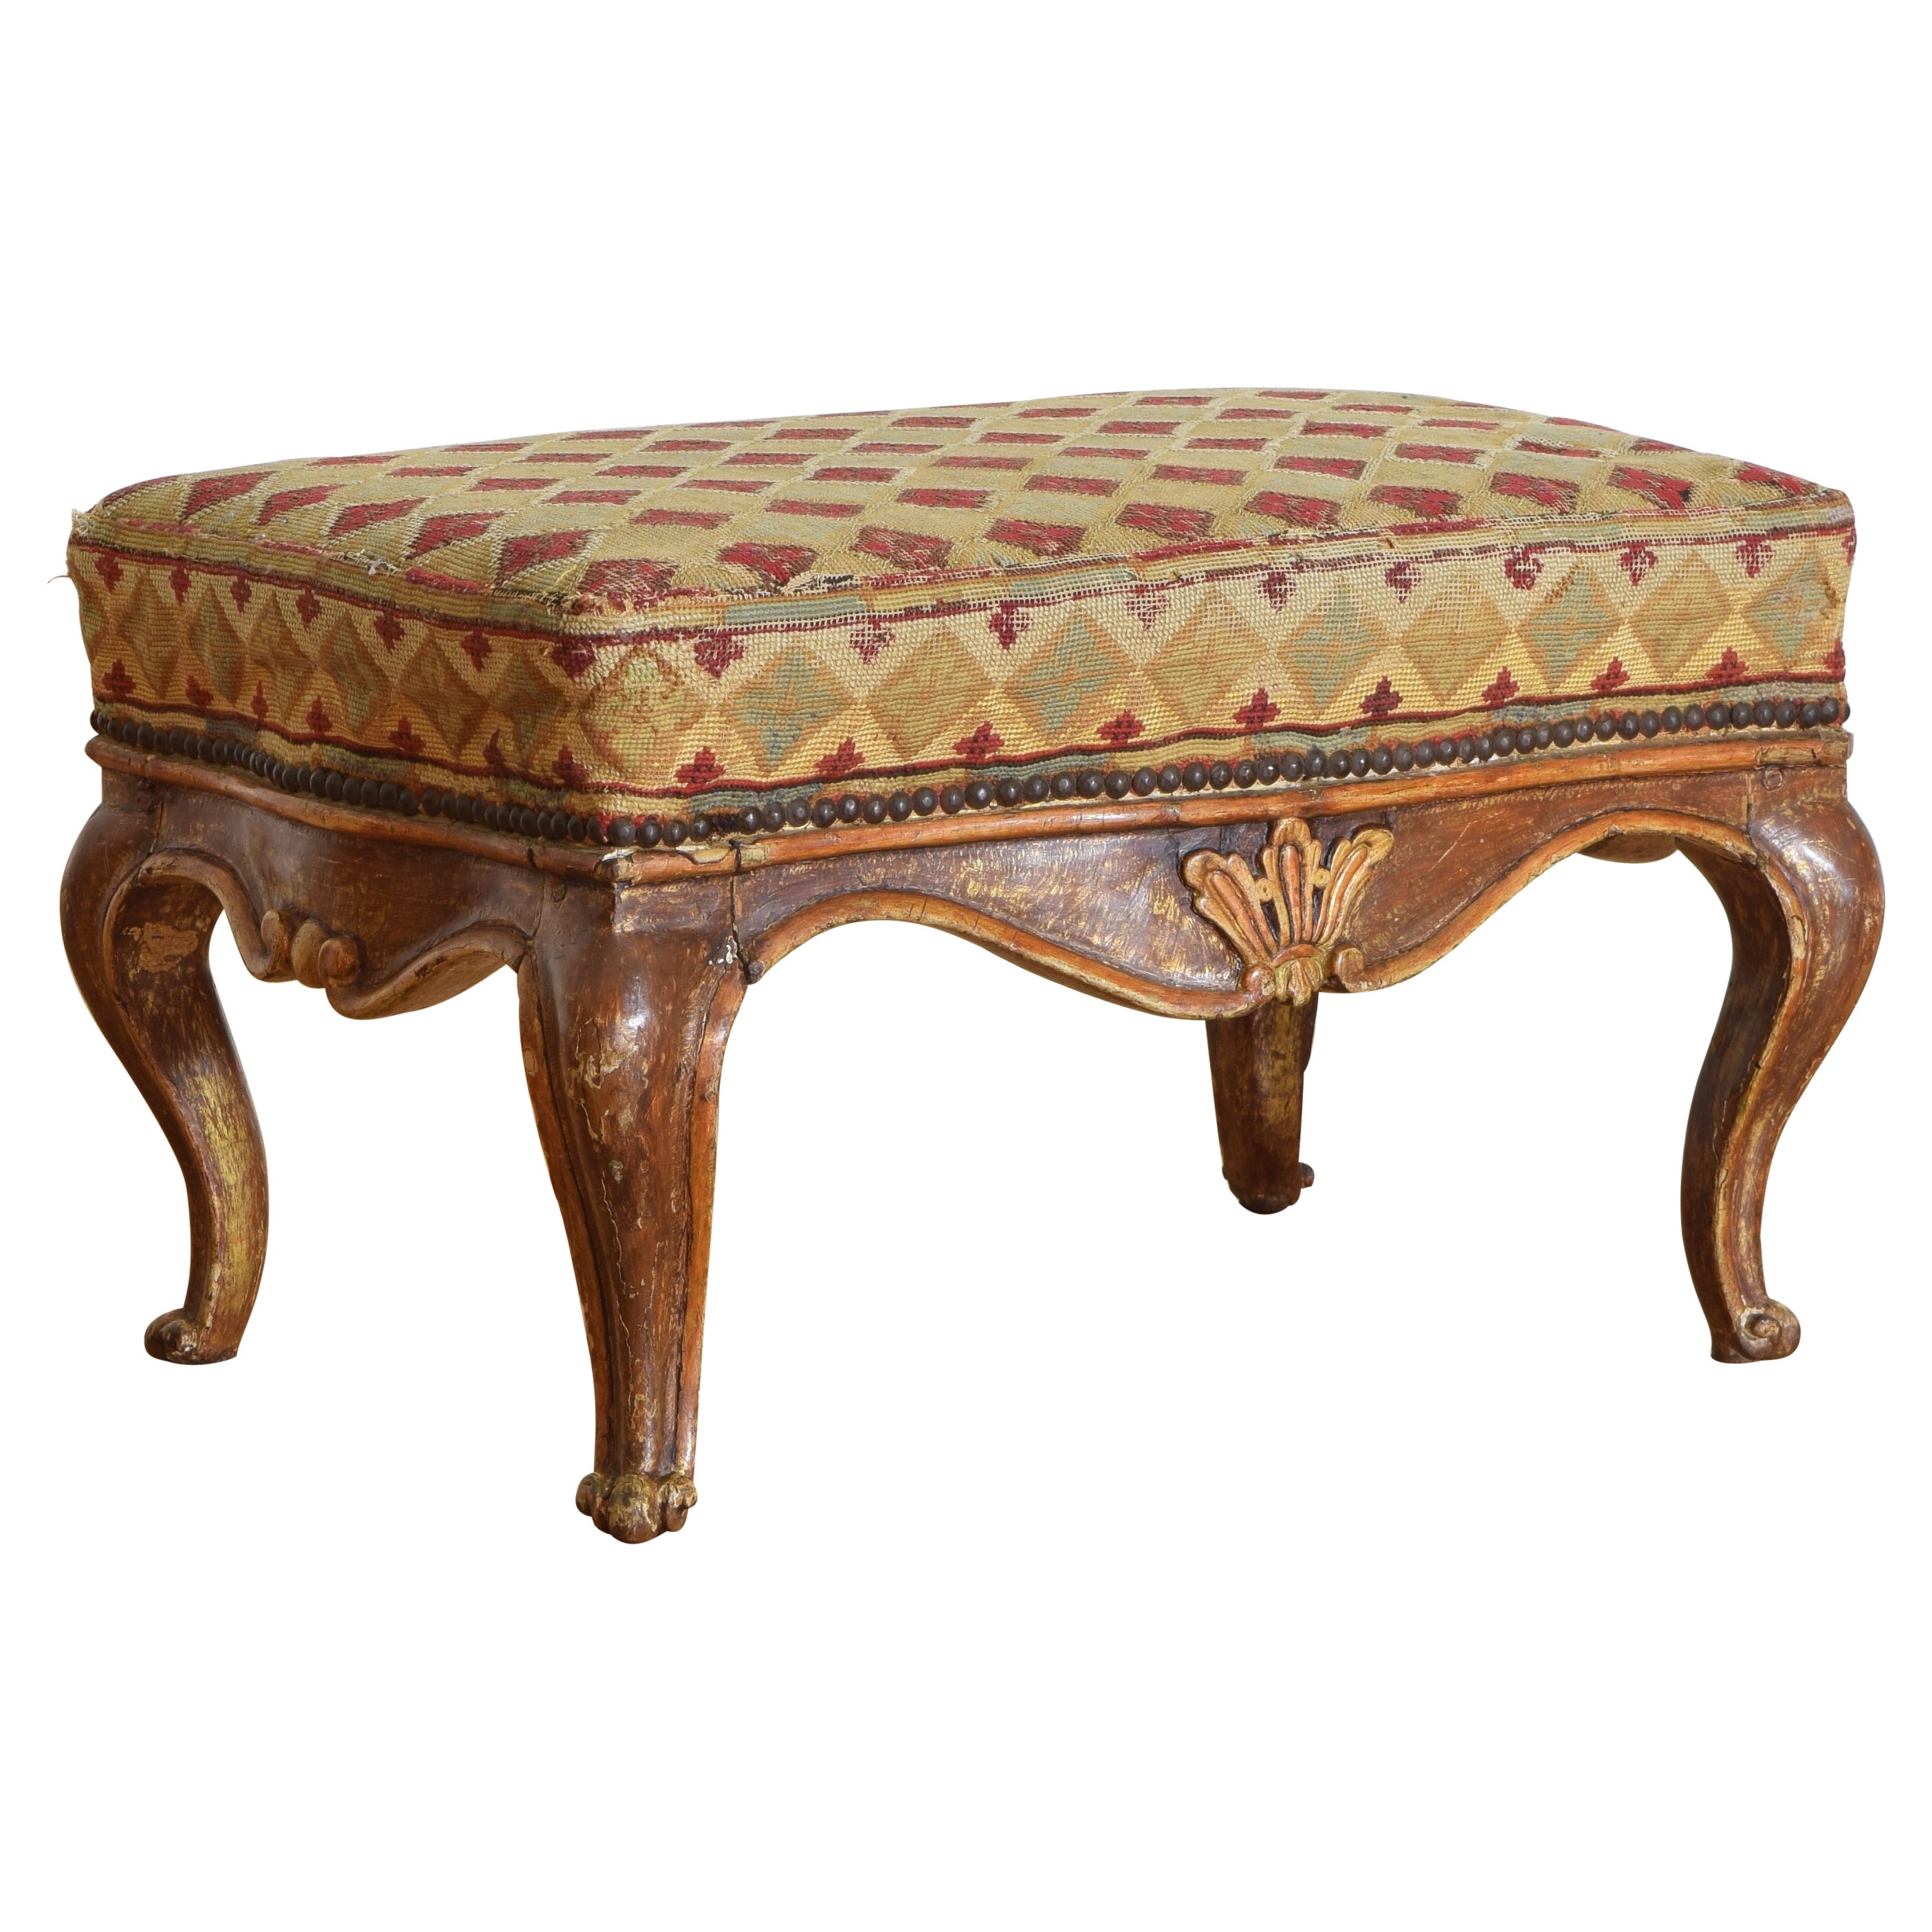 Italian, Piemontese, Rococo Period Lacquered and Gilded Footstool, Mid 18th Cen. For Sale